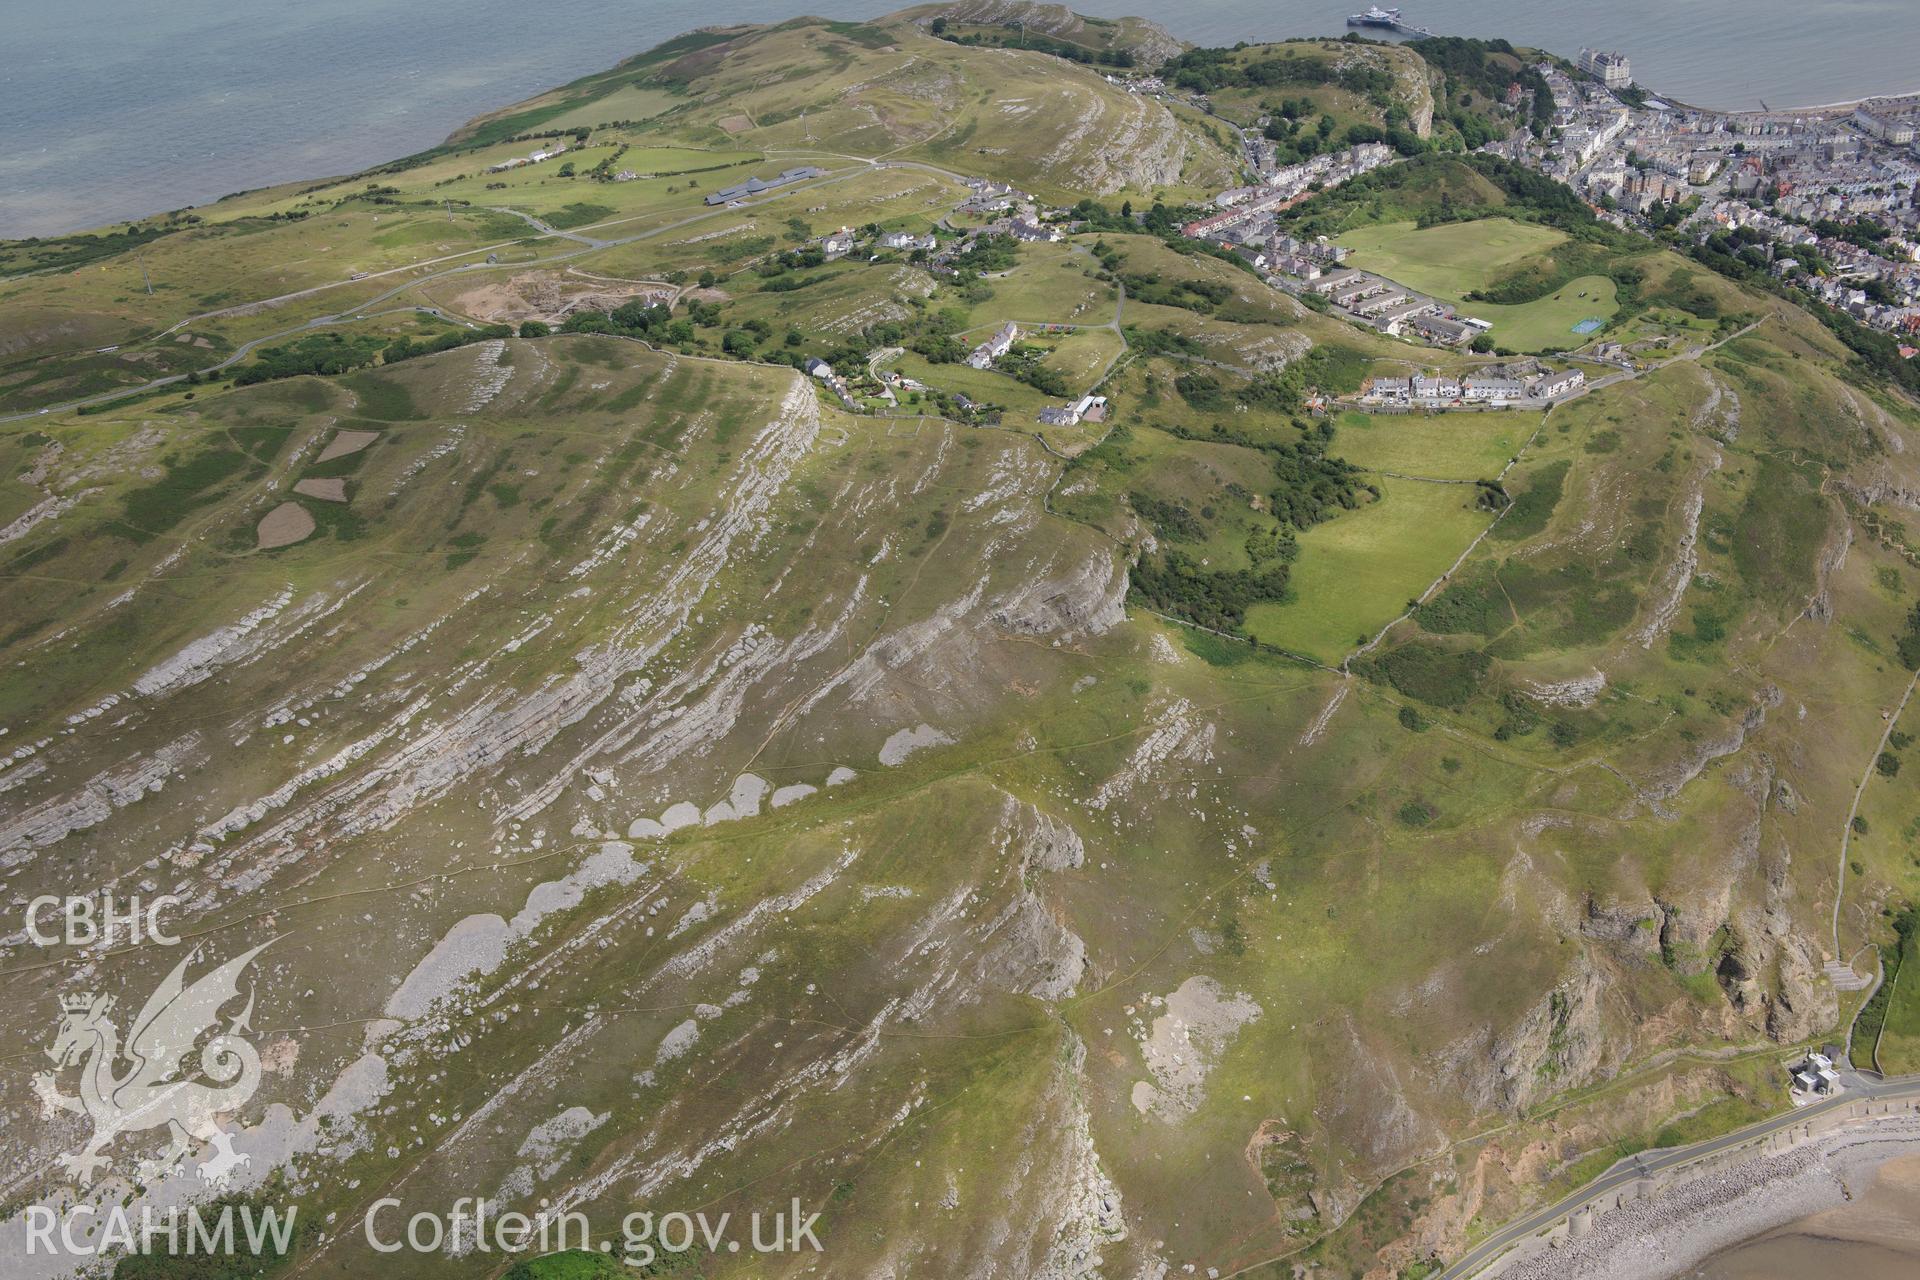 Llandudno pier and bar, Grand Hotel, tollgate house, Pen-y-Dinas Hillfort, Great Orme copper mine and tramway. Oblique aerial photograph taken during the Royal Commission's programme of archaeological aerial reconnaissance by Toby Driver on 30th July 2015.